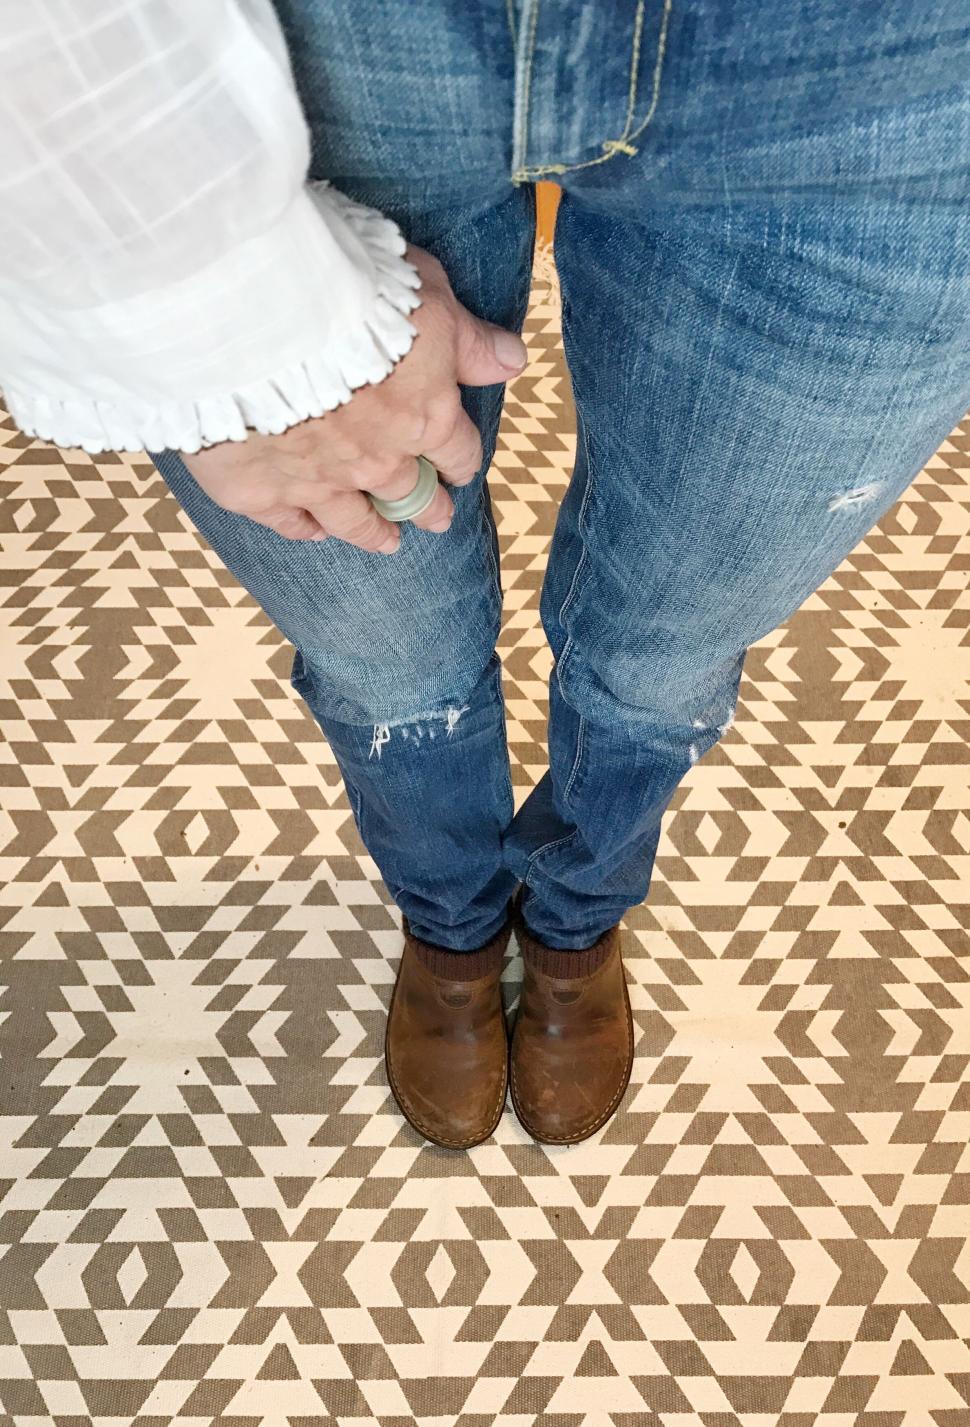 Free Image of Close-Up of Woman s Feet in Jeans and Boots 